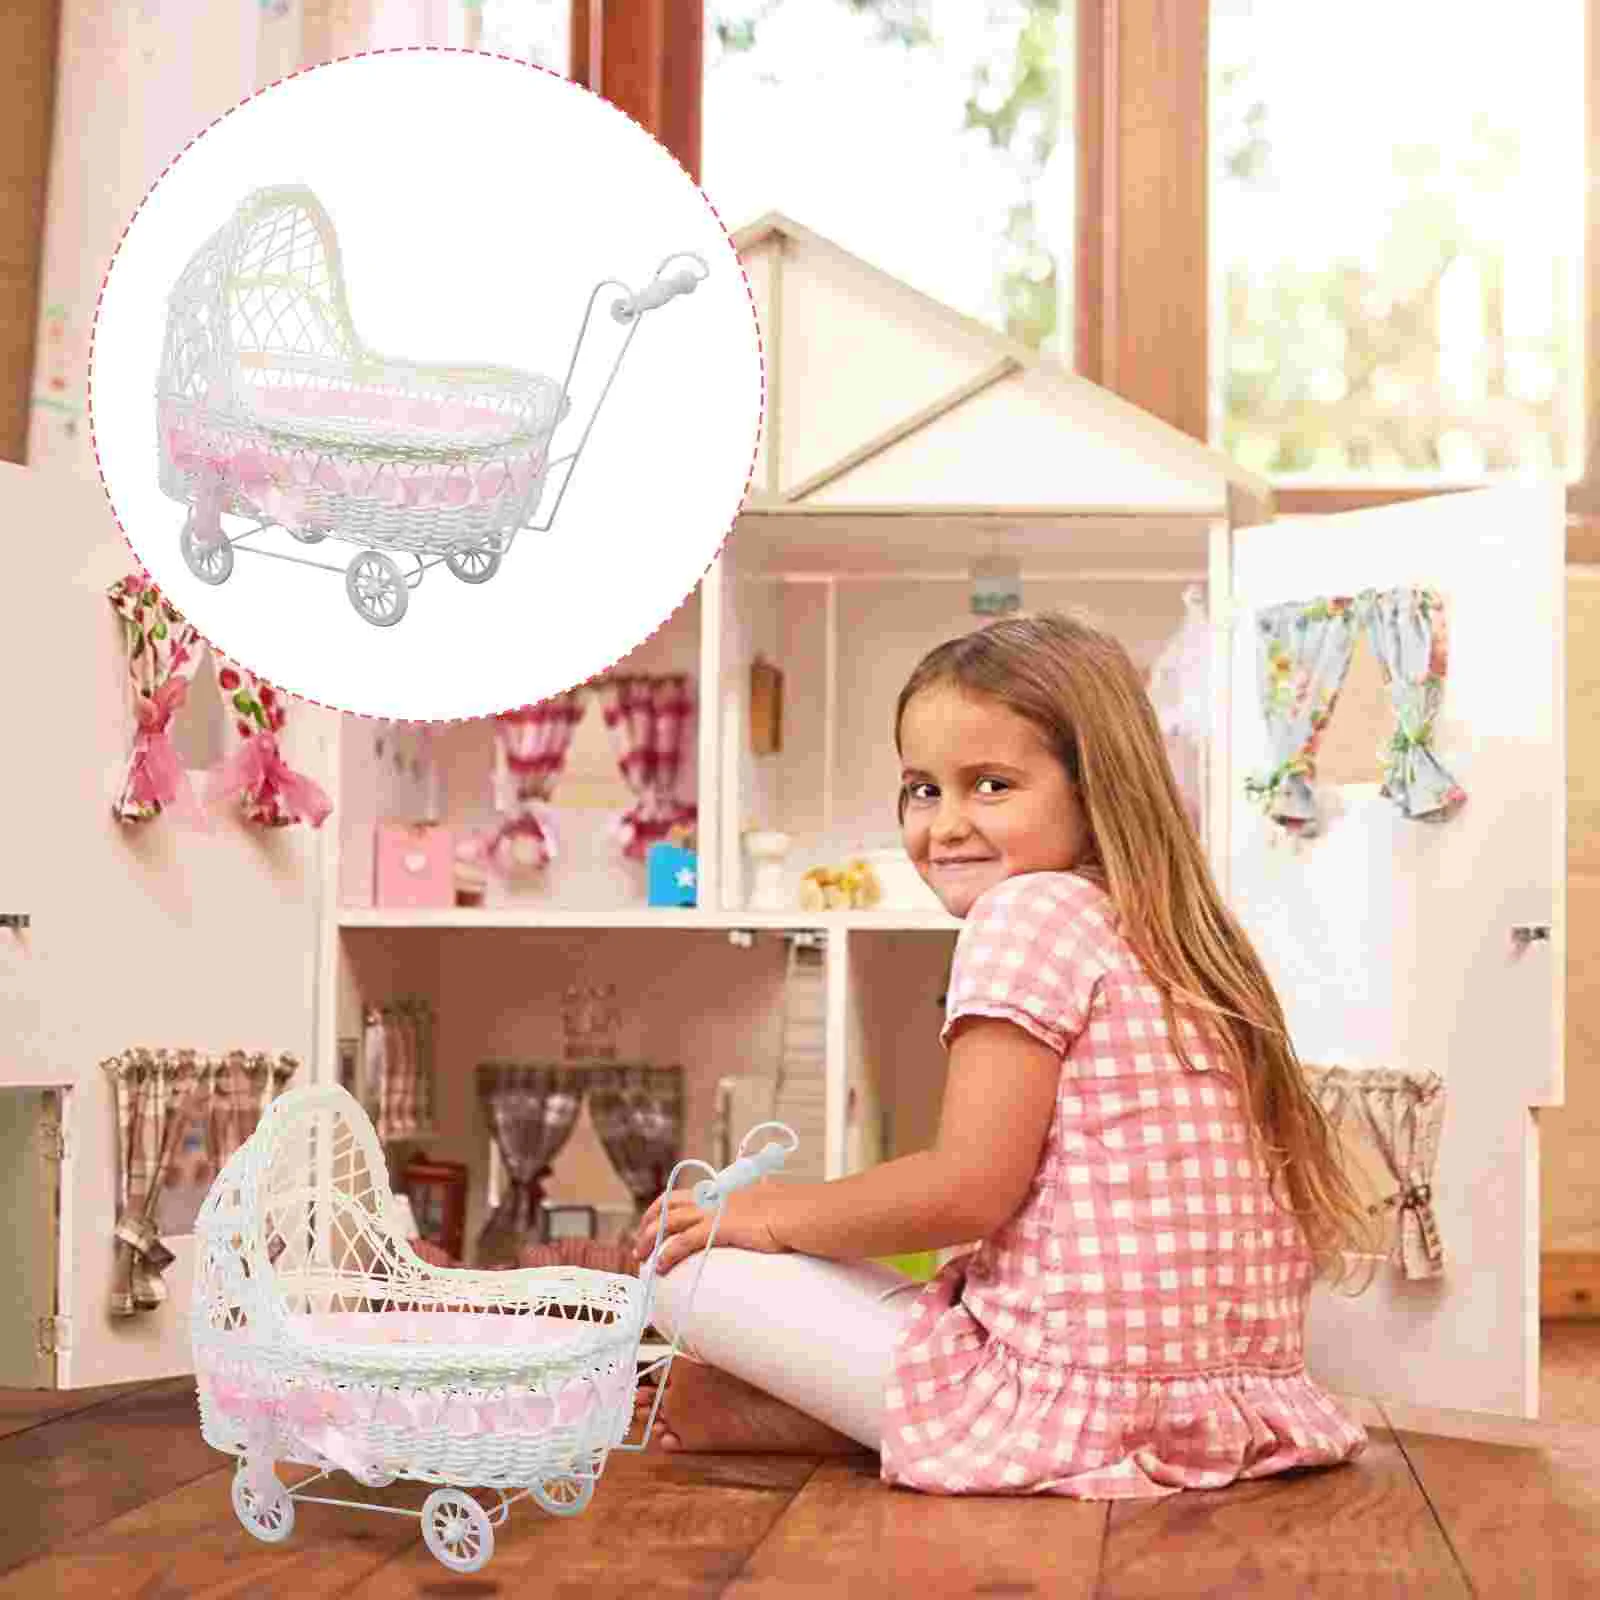 

Basket Baby Box Flower Shower Candy Baskets Party Storage Baptism Decorations Small Organizer Cutie Favor Mini Stroller Woven